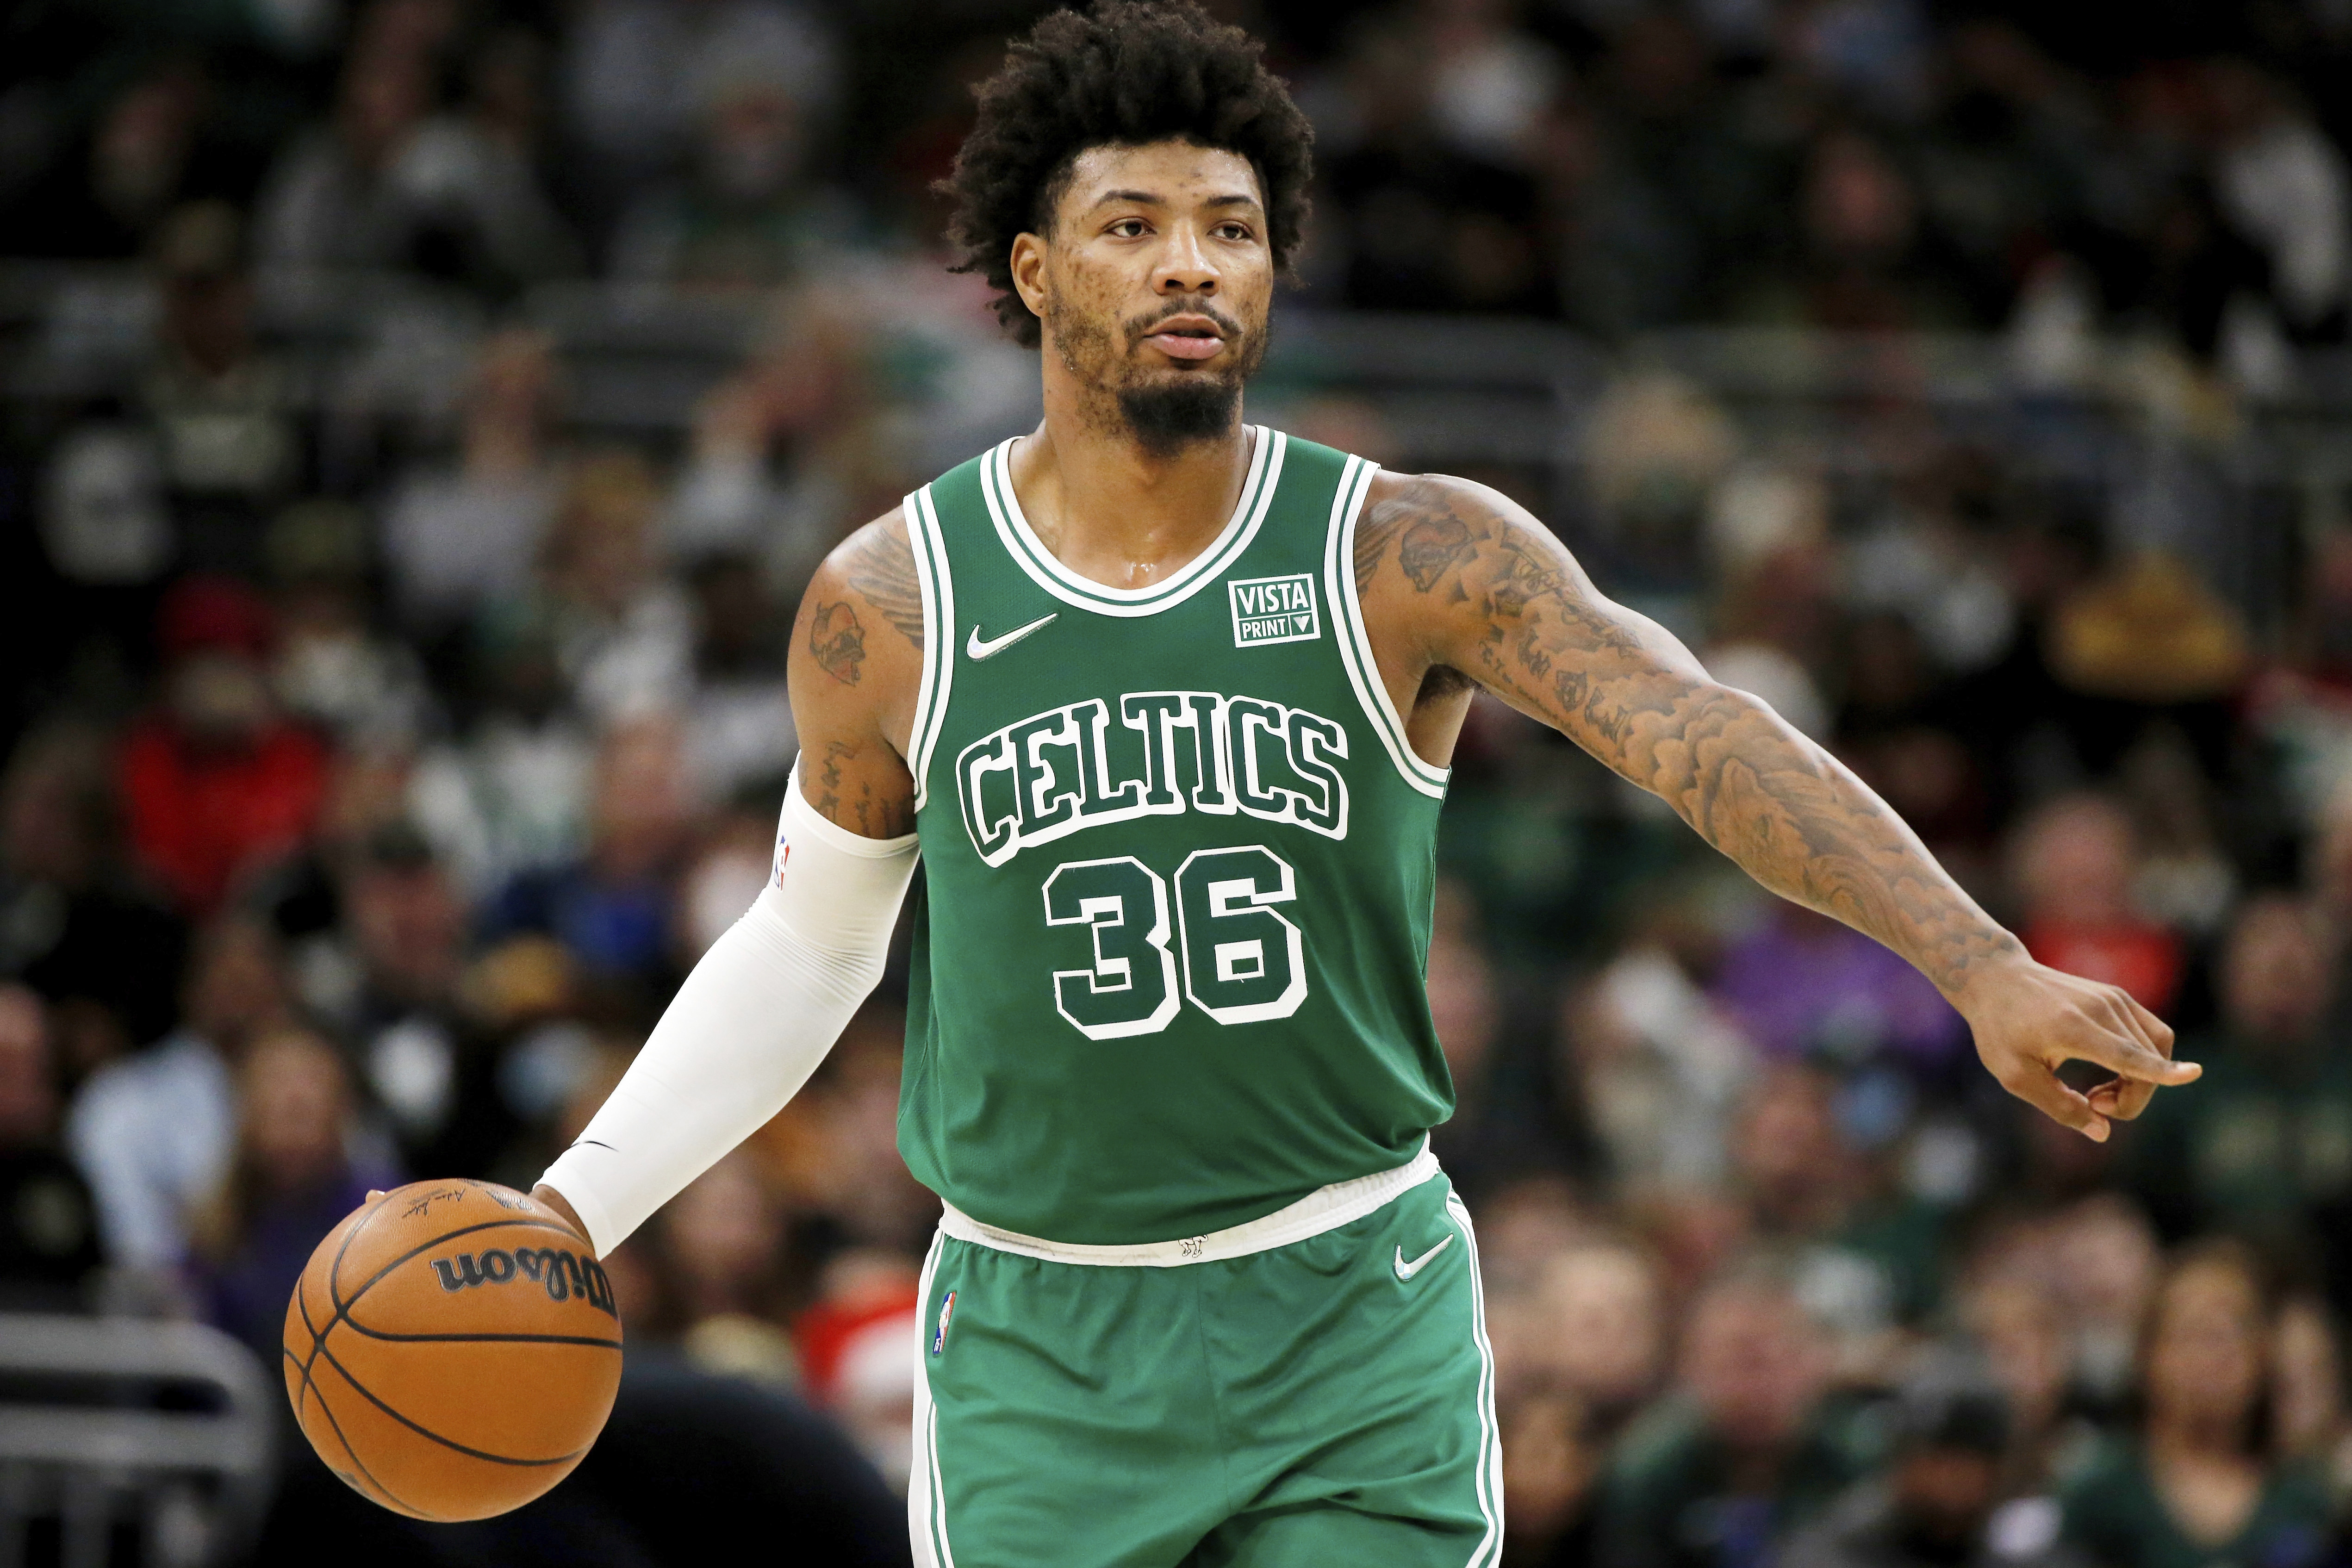 Love and trust: a final ode to nine years of Marcus Smart - CelticsBlog